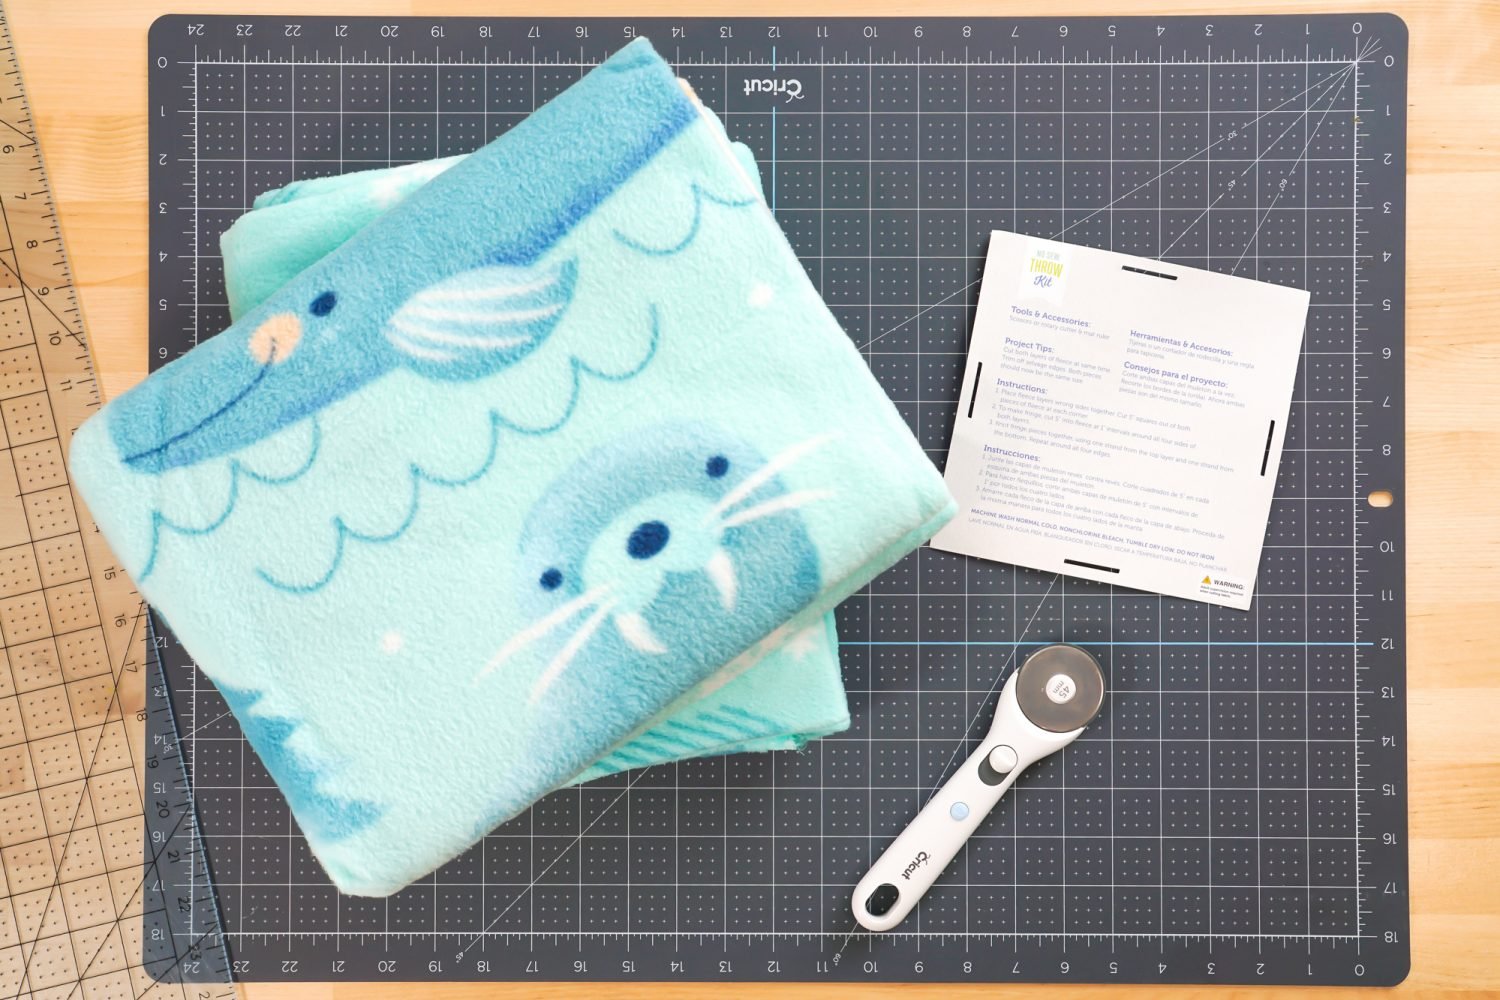 Fleece blanket kit with rotary cutter and instructions from tag